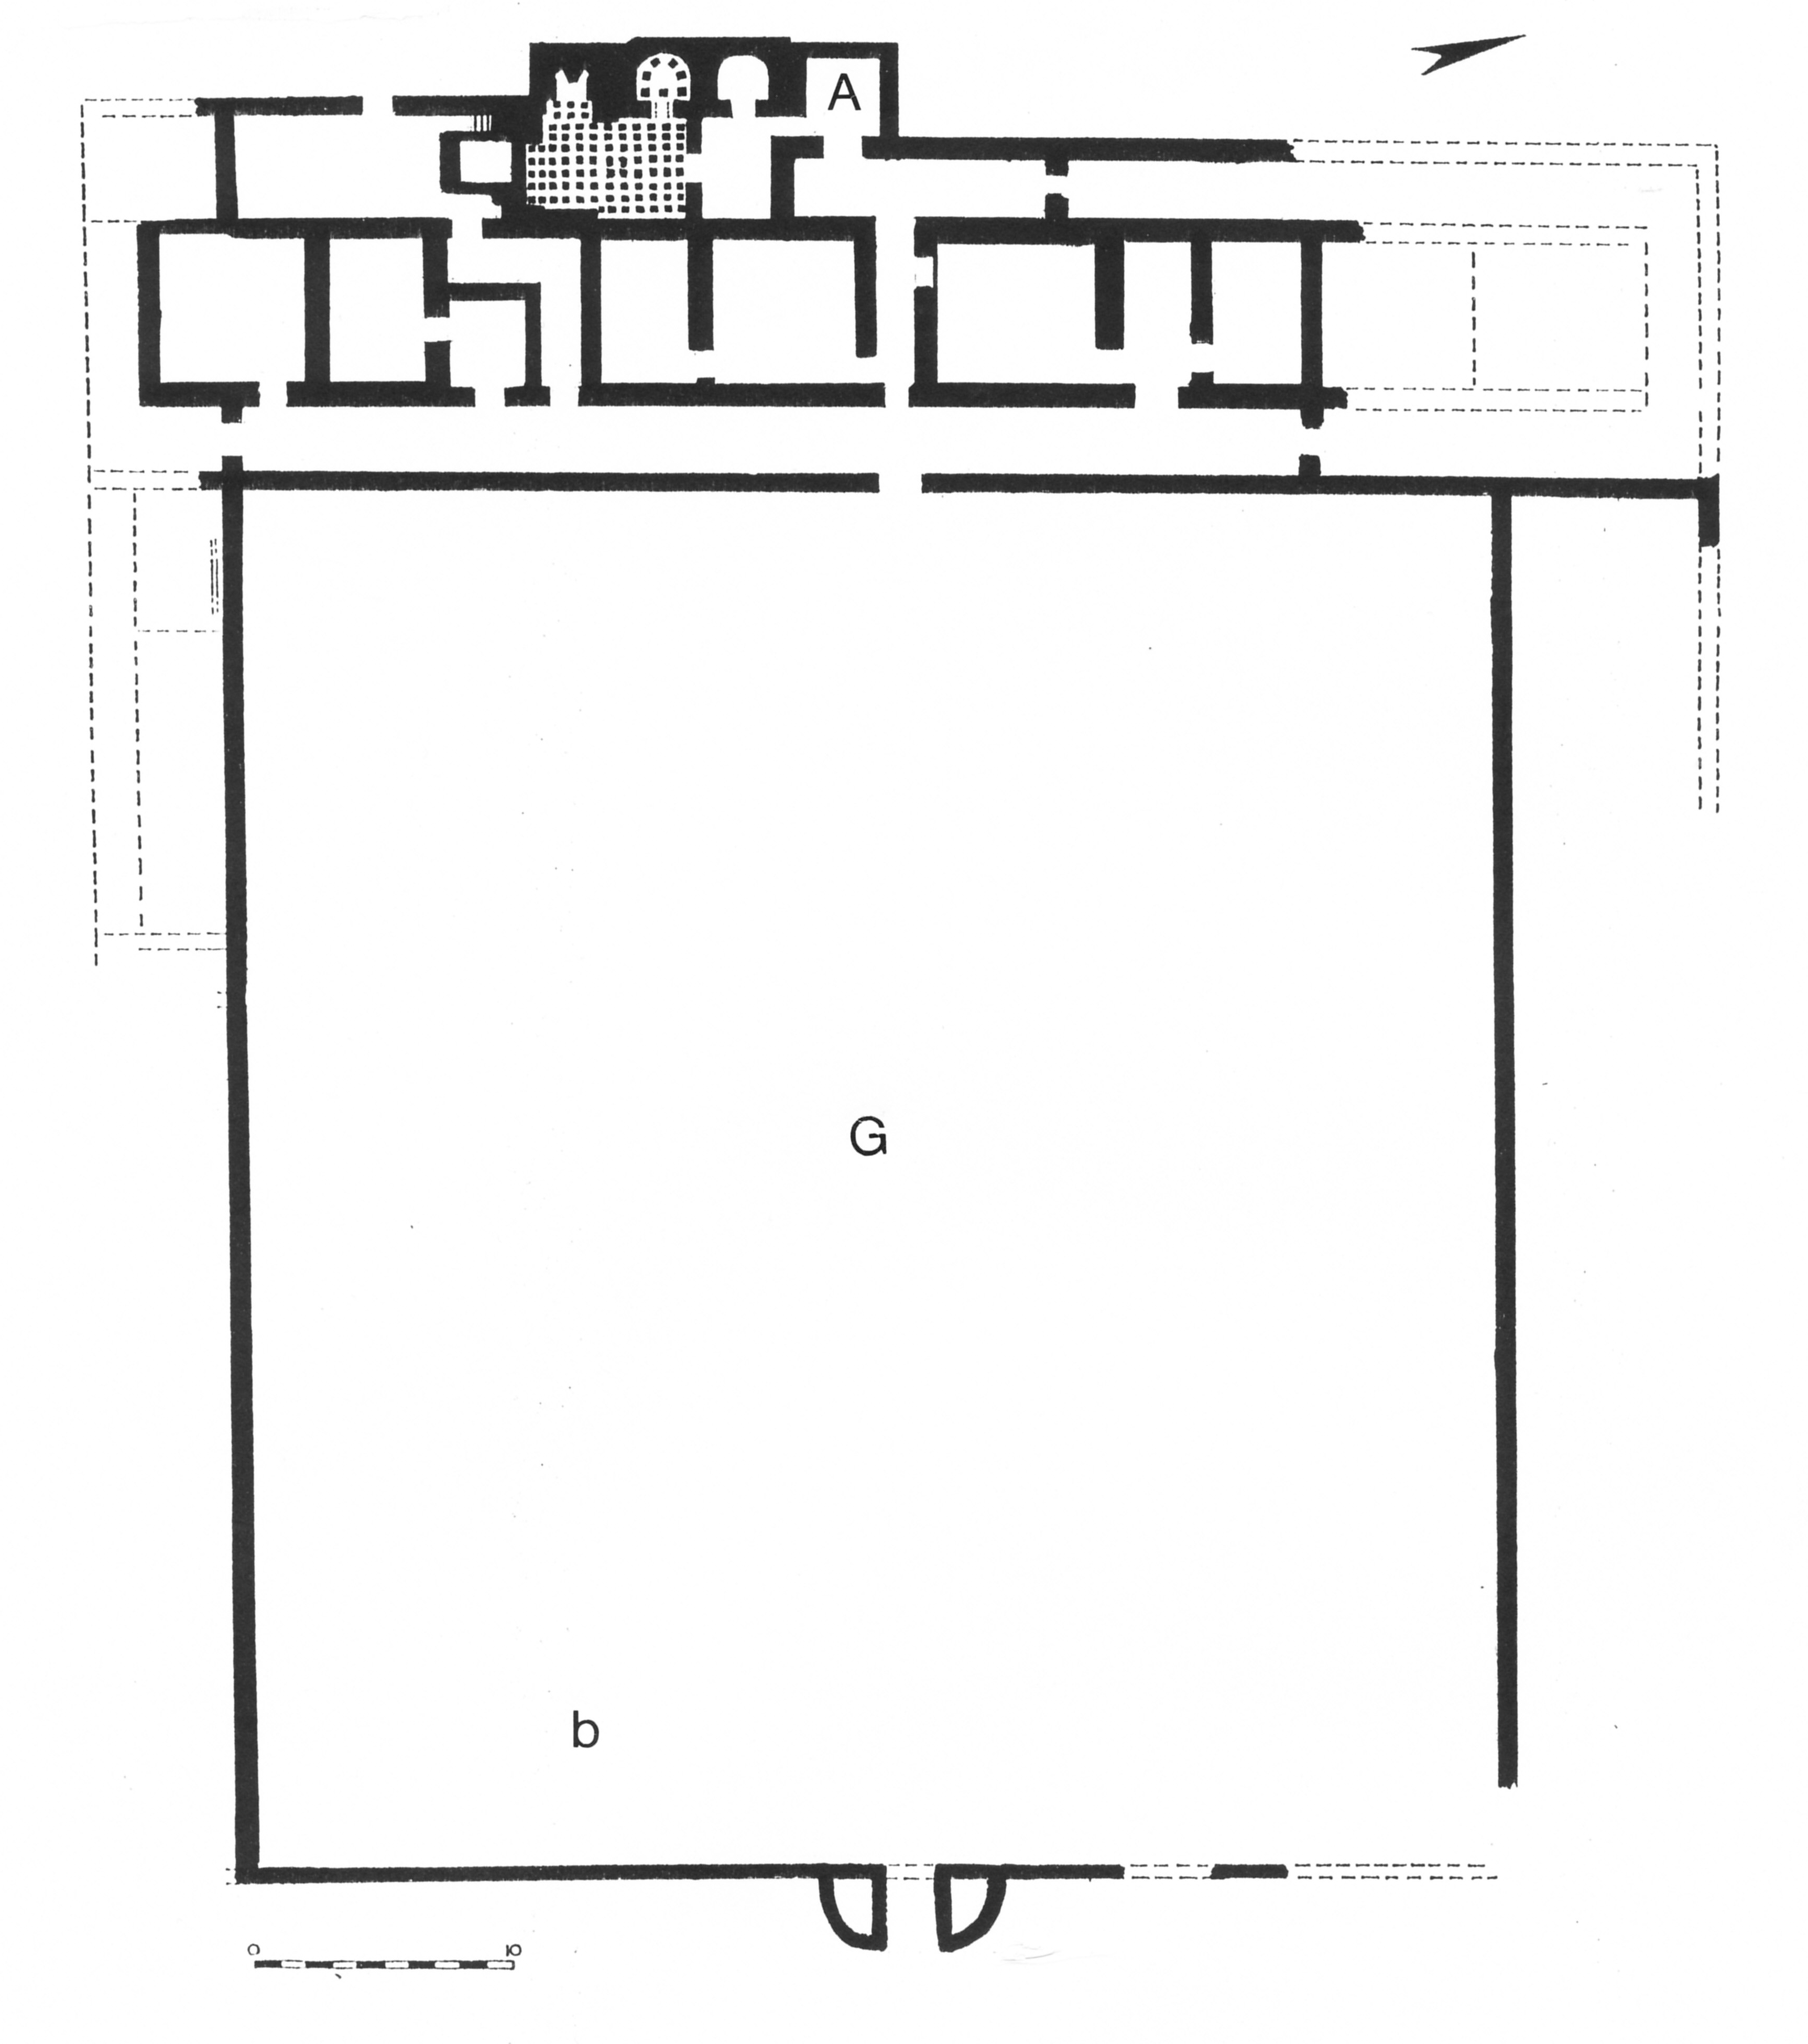 Fig. 1: Plan of the residential building (A) with excavated bedding trenches (b) in its garden courtyard (G). Adapted from Branigan 1971, fig. 20.